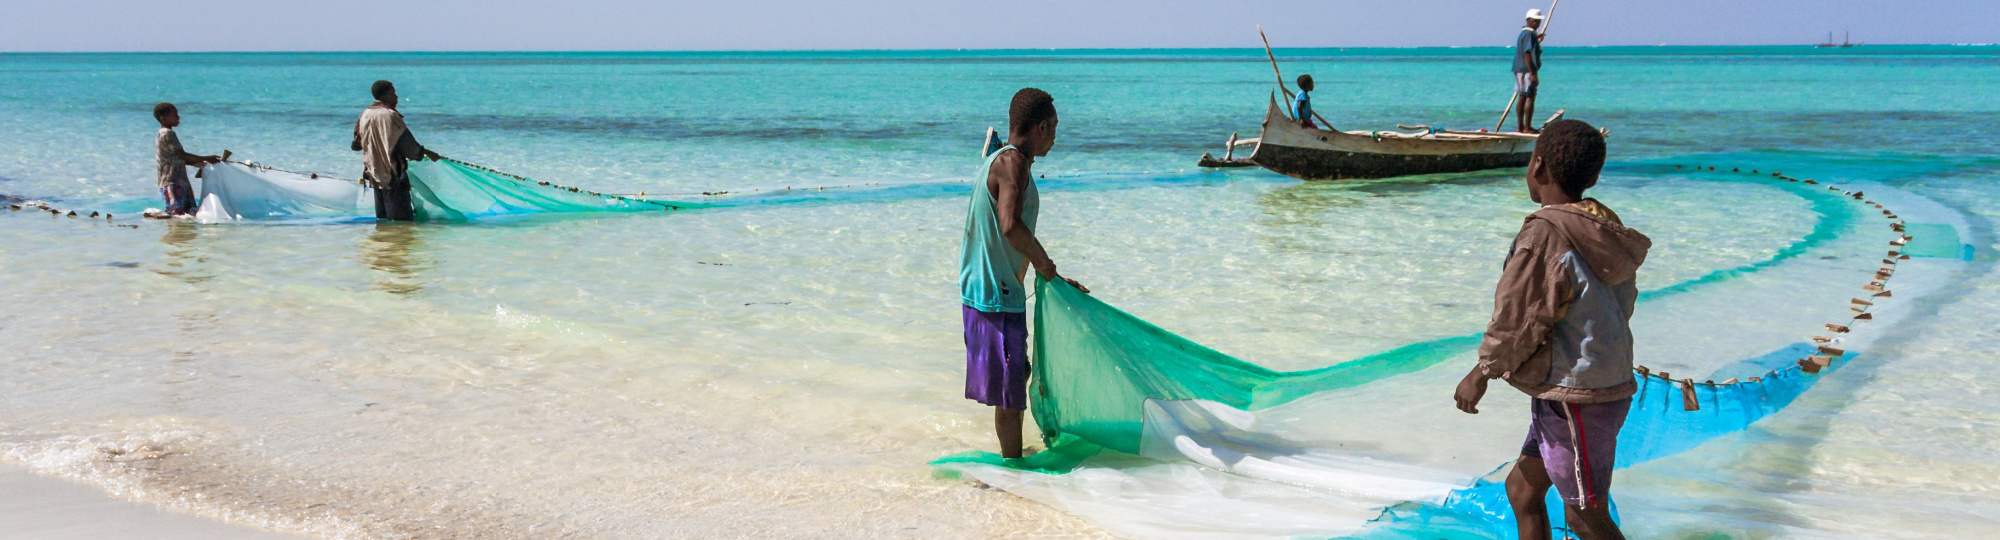 Six fishermen and their fishing net in the Salary lagoon, southwestern Madagascar on July 22, 2016